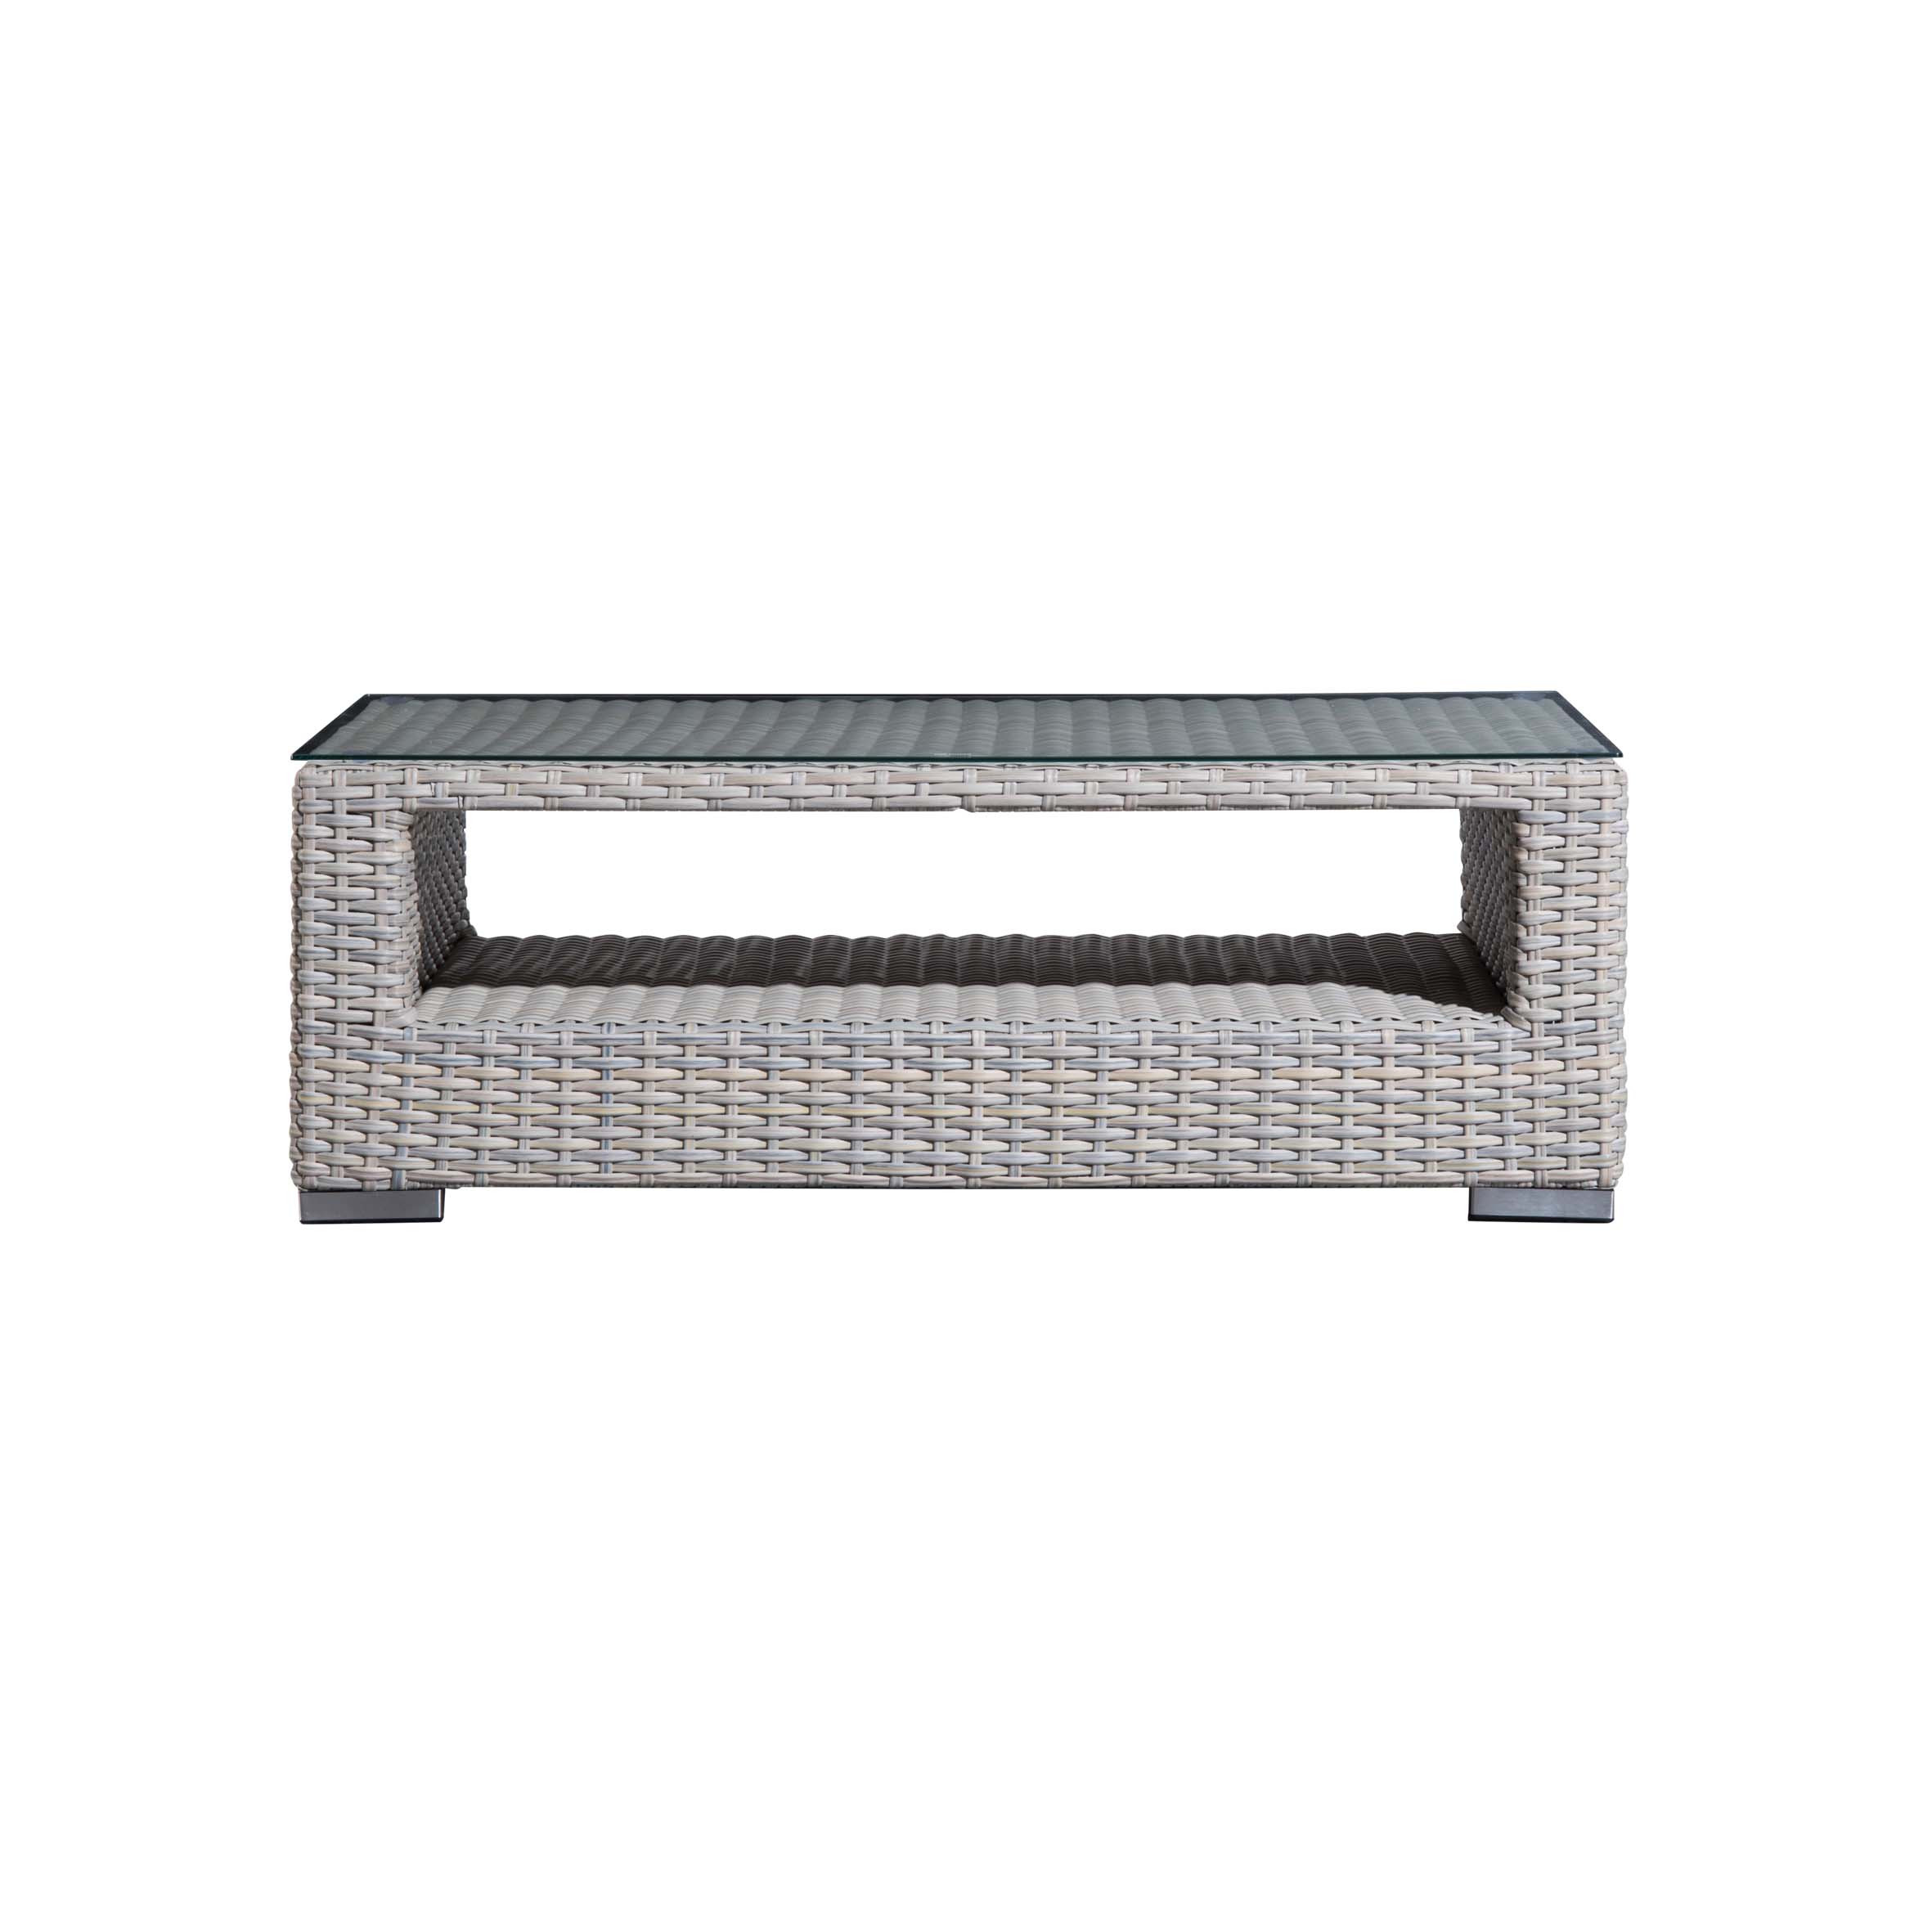 Ideal rattan coffee table S2